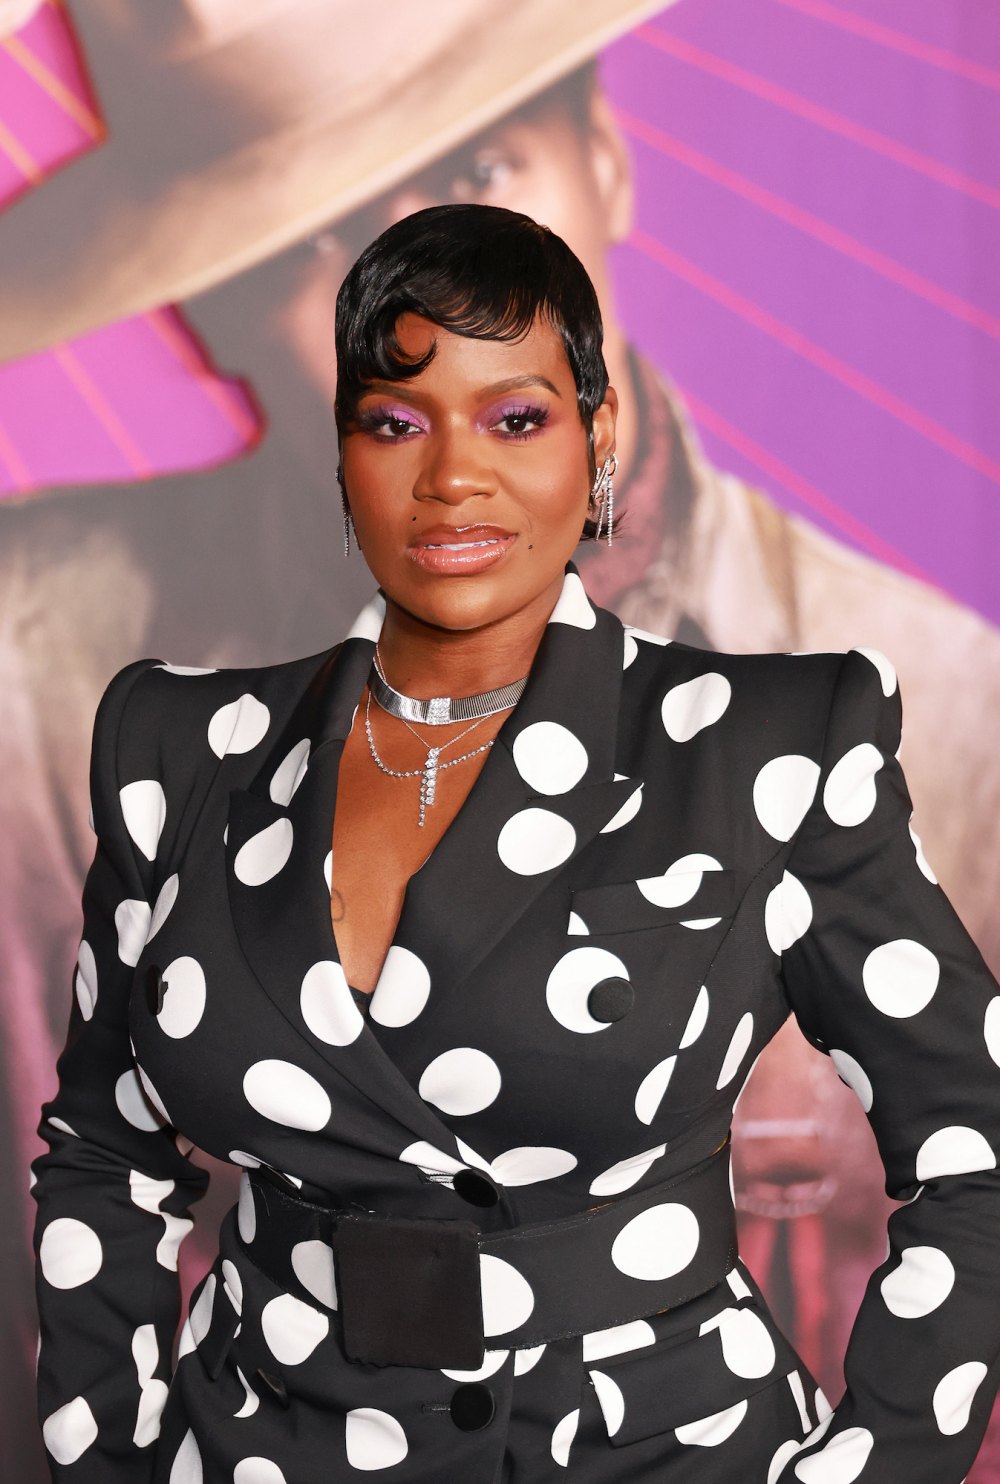 Fantasia Barrino Is Grateful to Star in The Color Purple After Losing Everything Twice